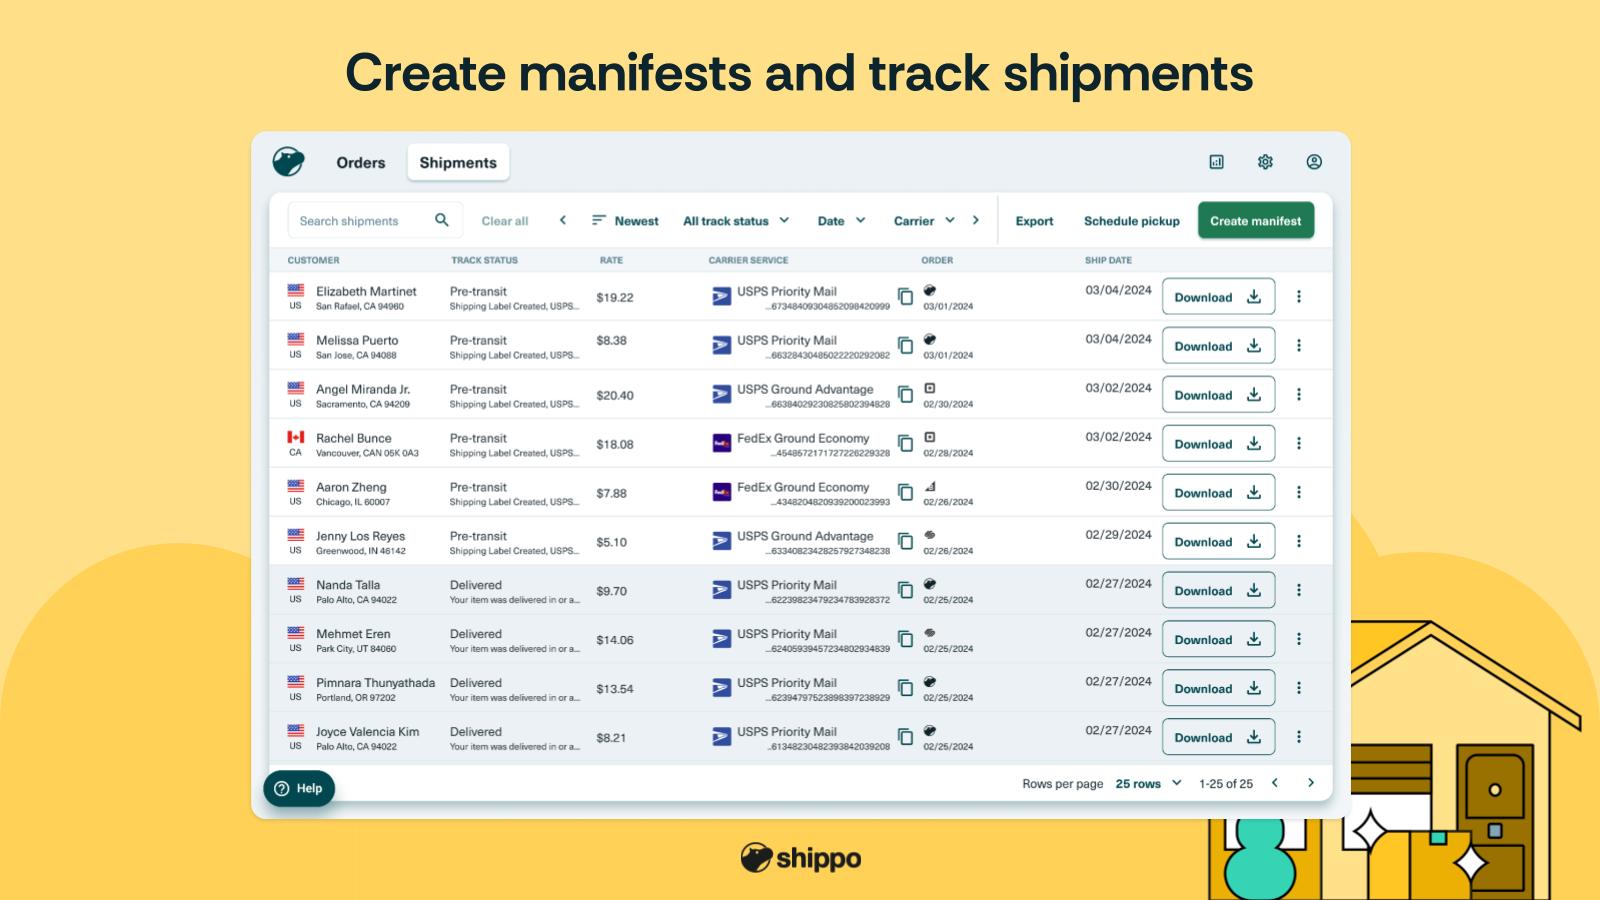 Create manifests and track shipments